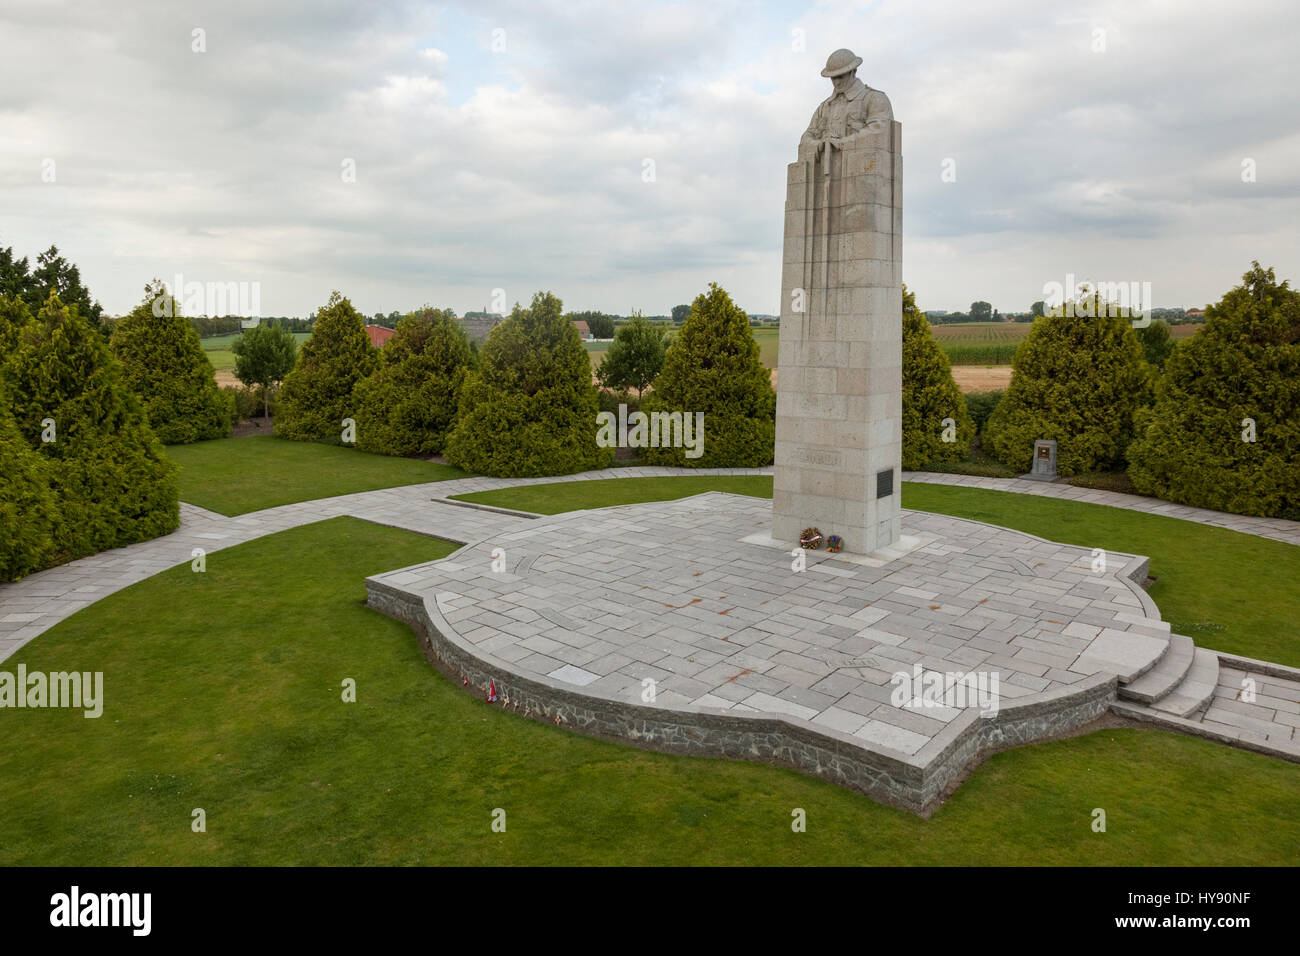 St. Julien Canadian Memorial at at Vancouver Corner, Flanders Belgium, to the Canadian soldiers who died during the first German gas attack of WW1. Stock Photo